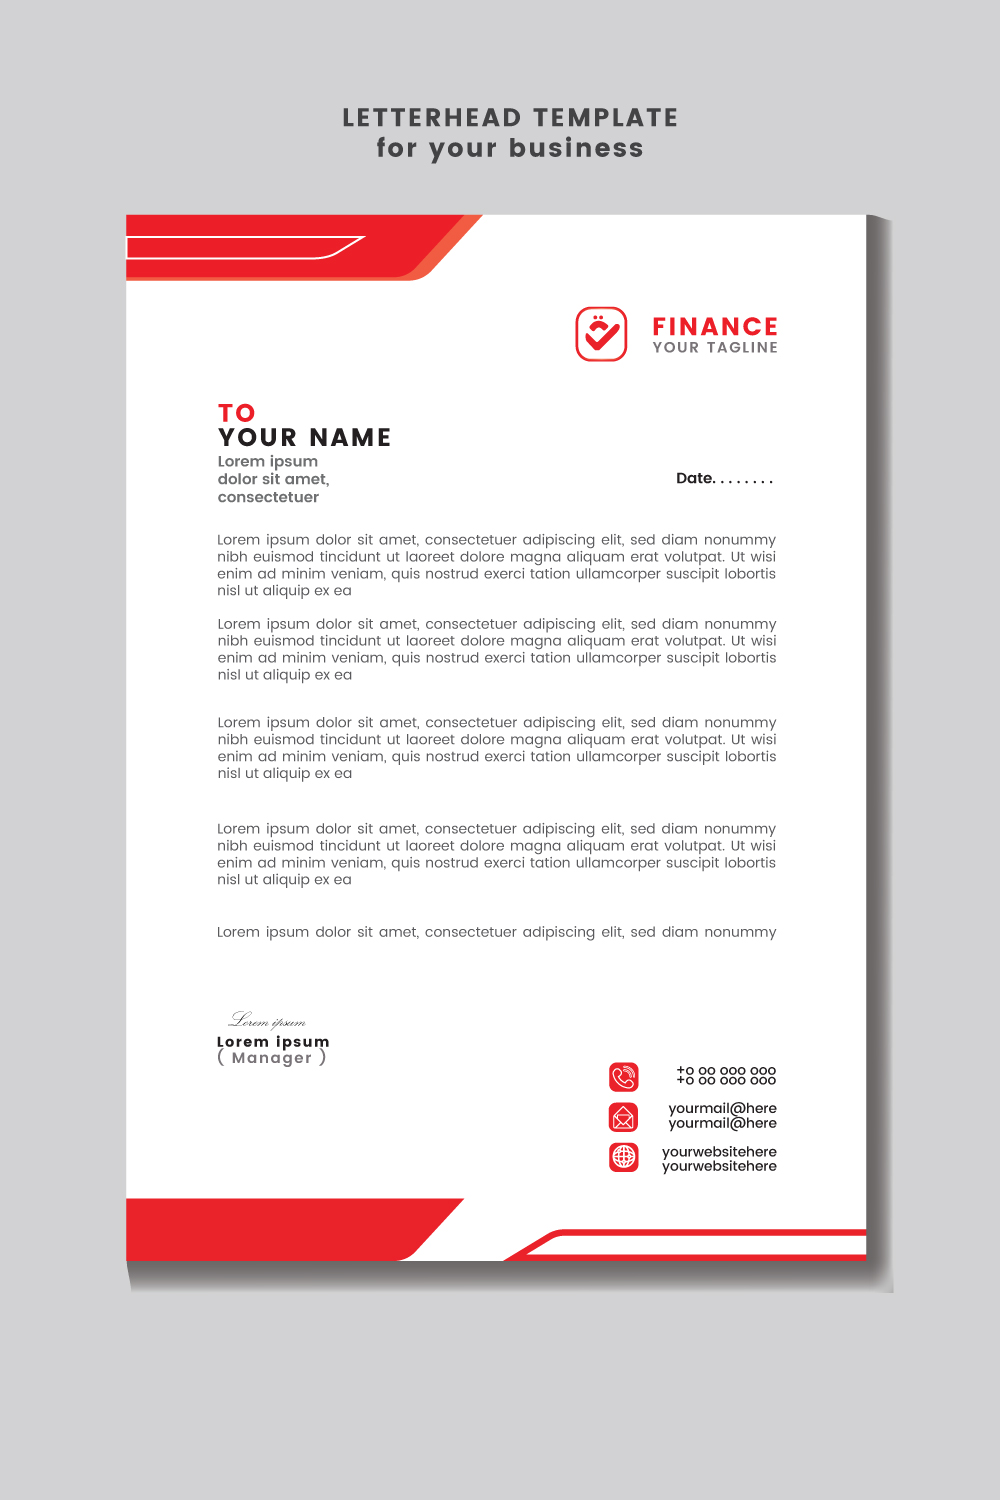 Letterhead template design for your business Flyer Design Template stock illustrationFlyer template pinterest preview image.